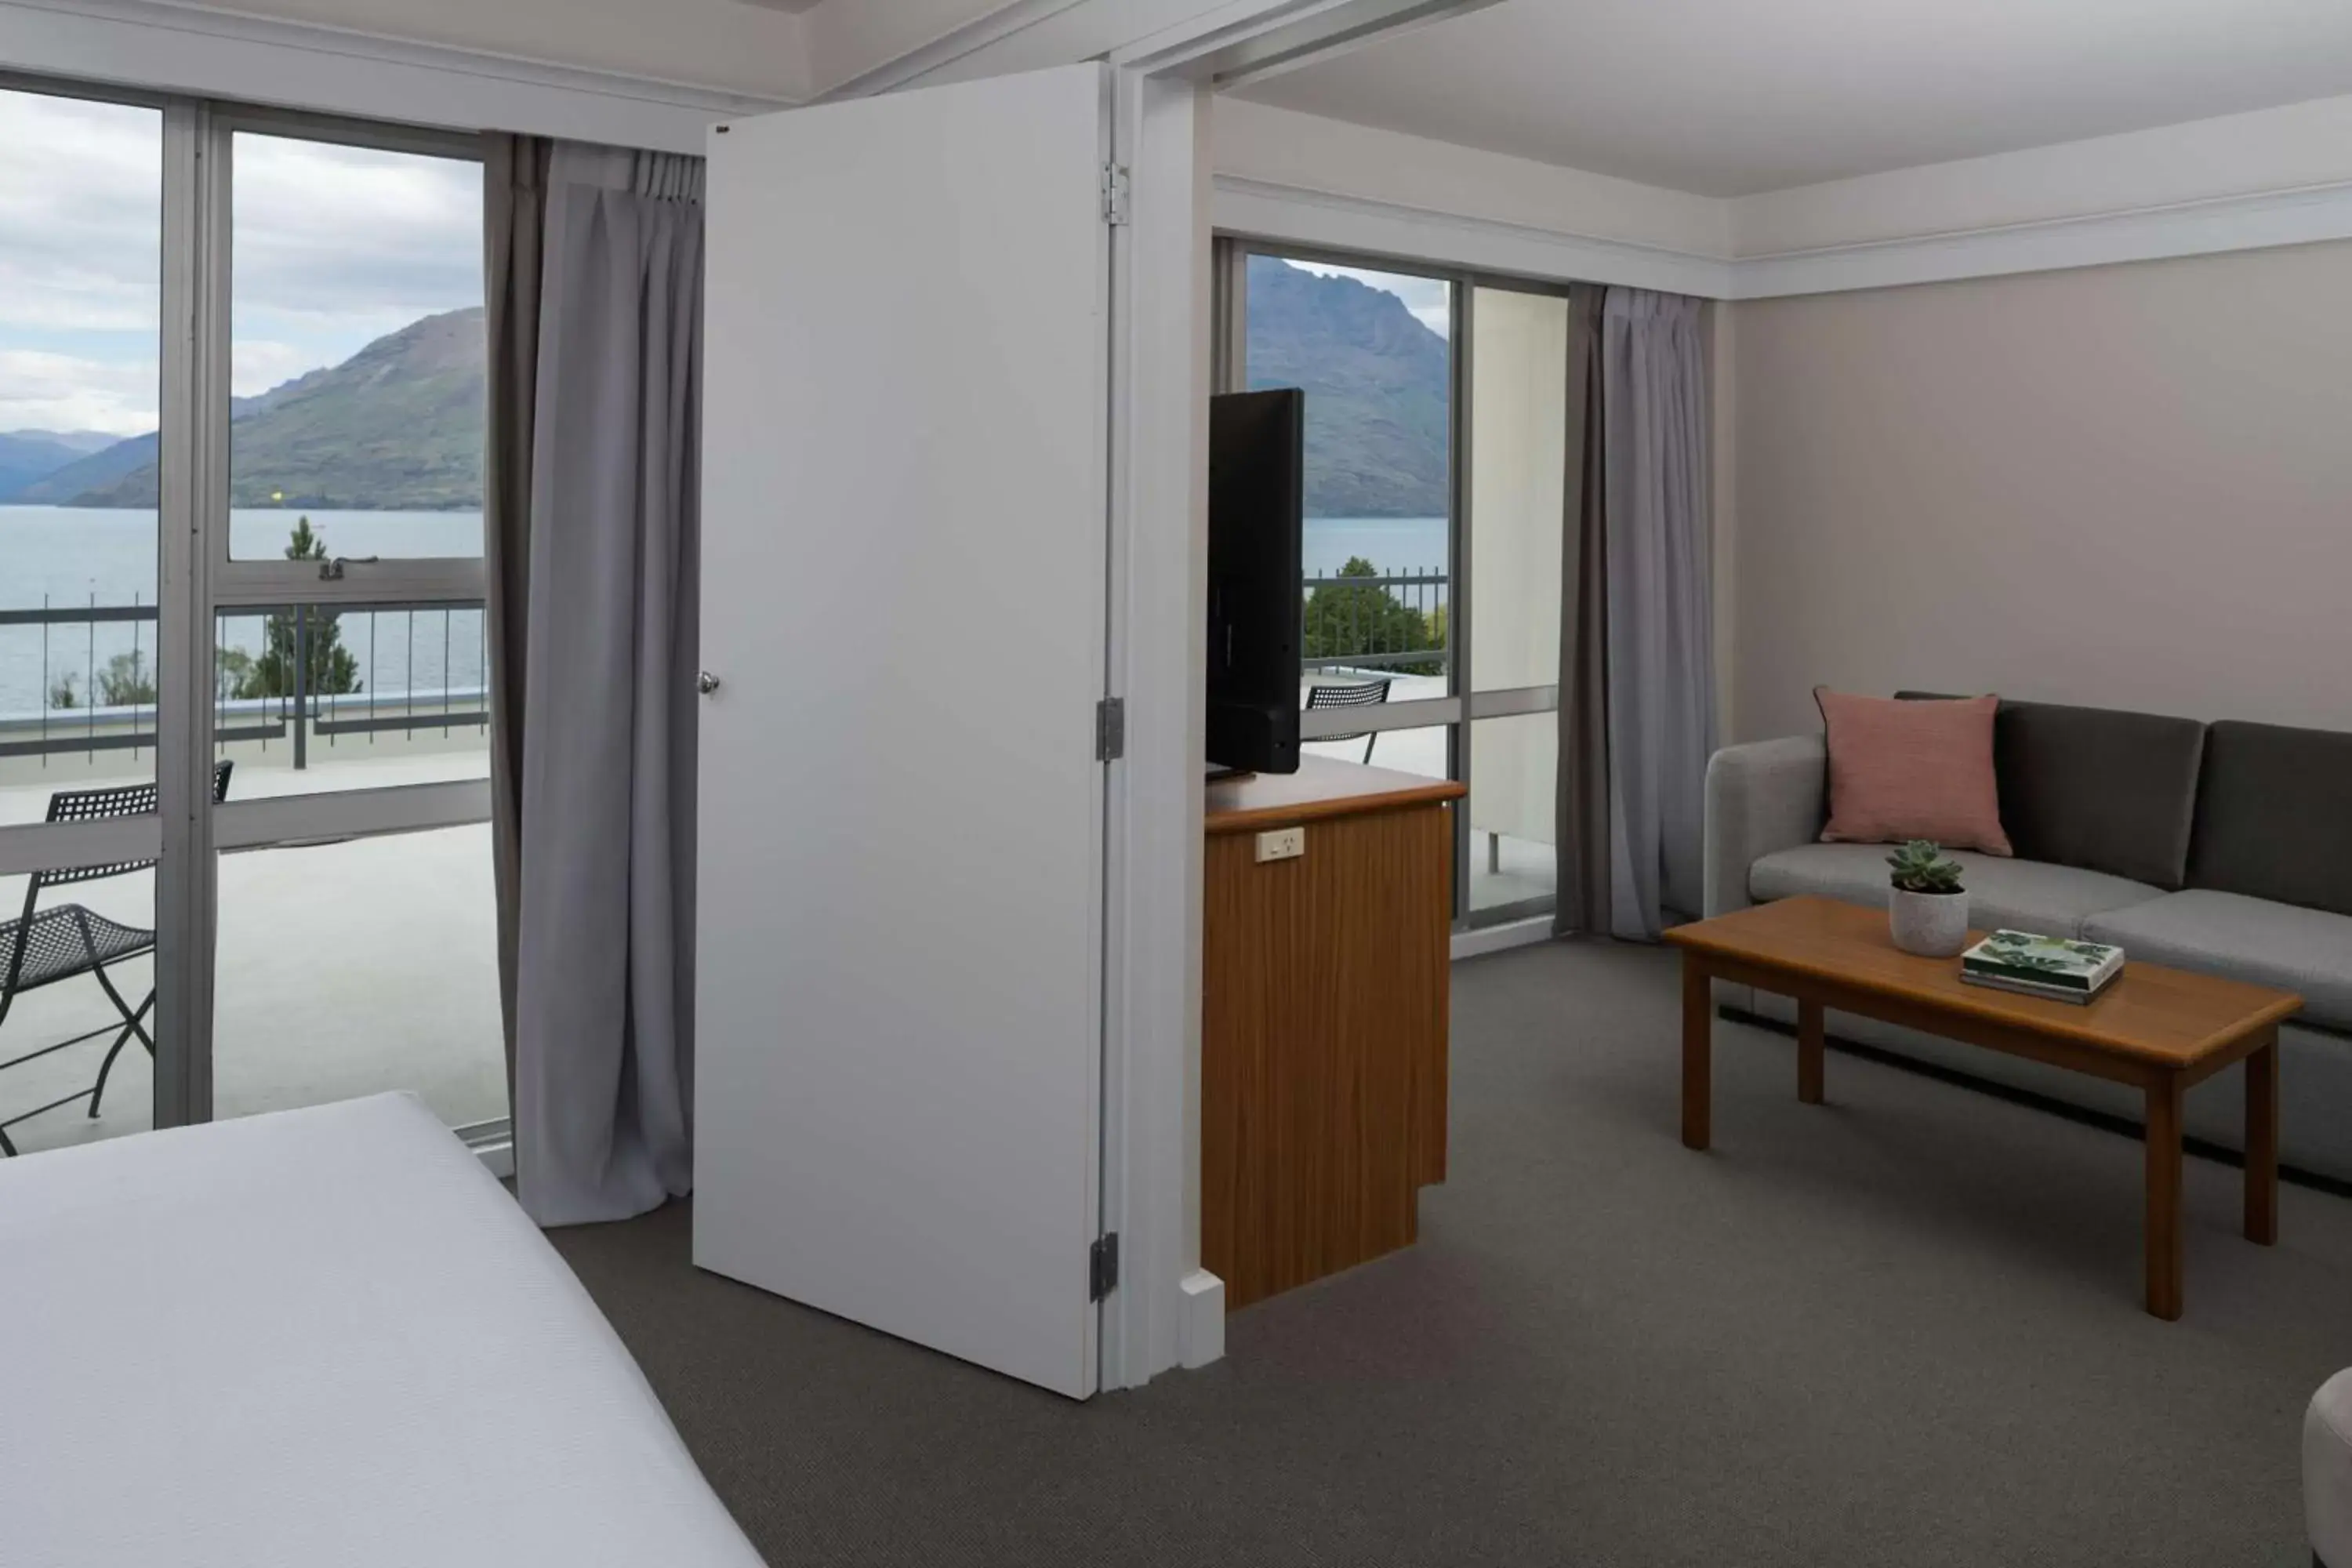 Photo of the whole room in Rydges Lakeland Resort Queenstown